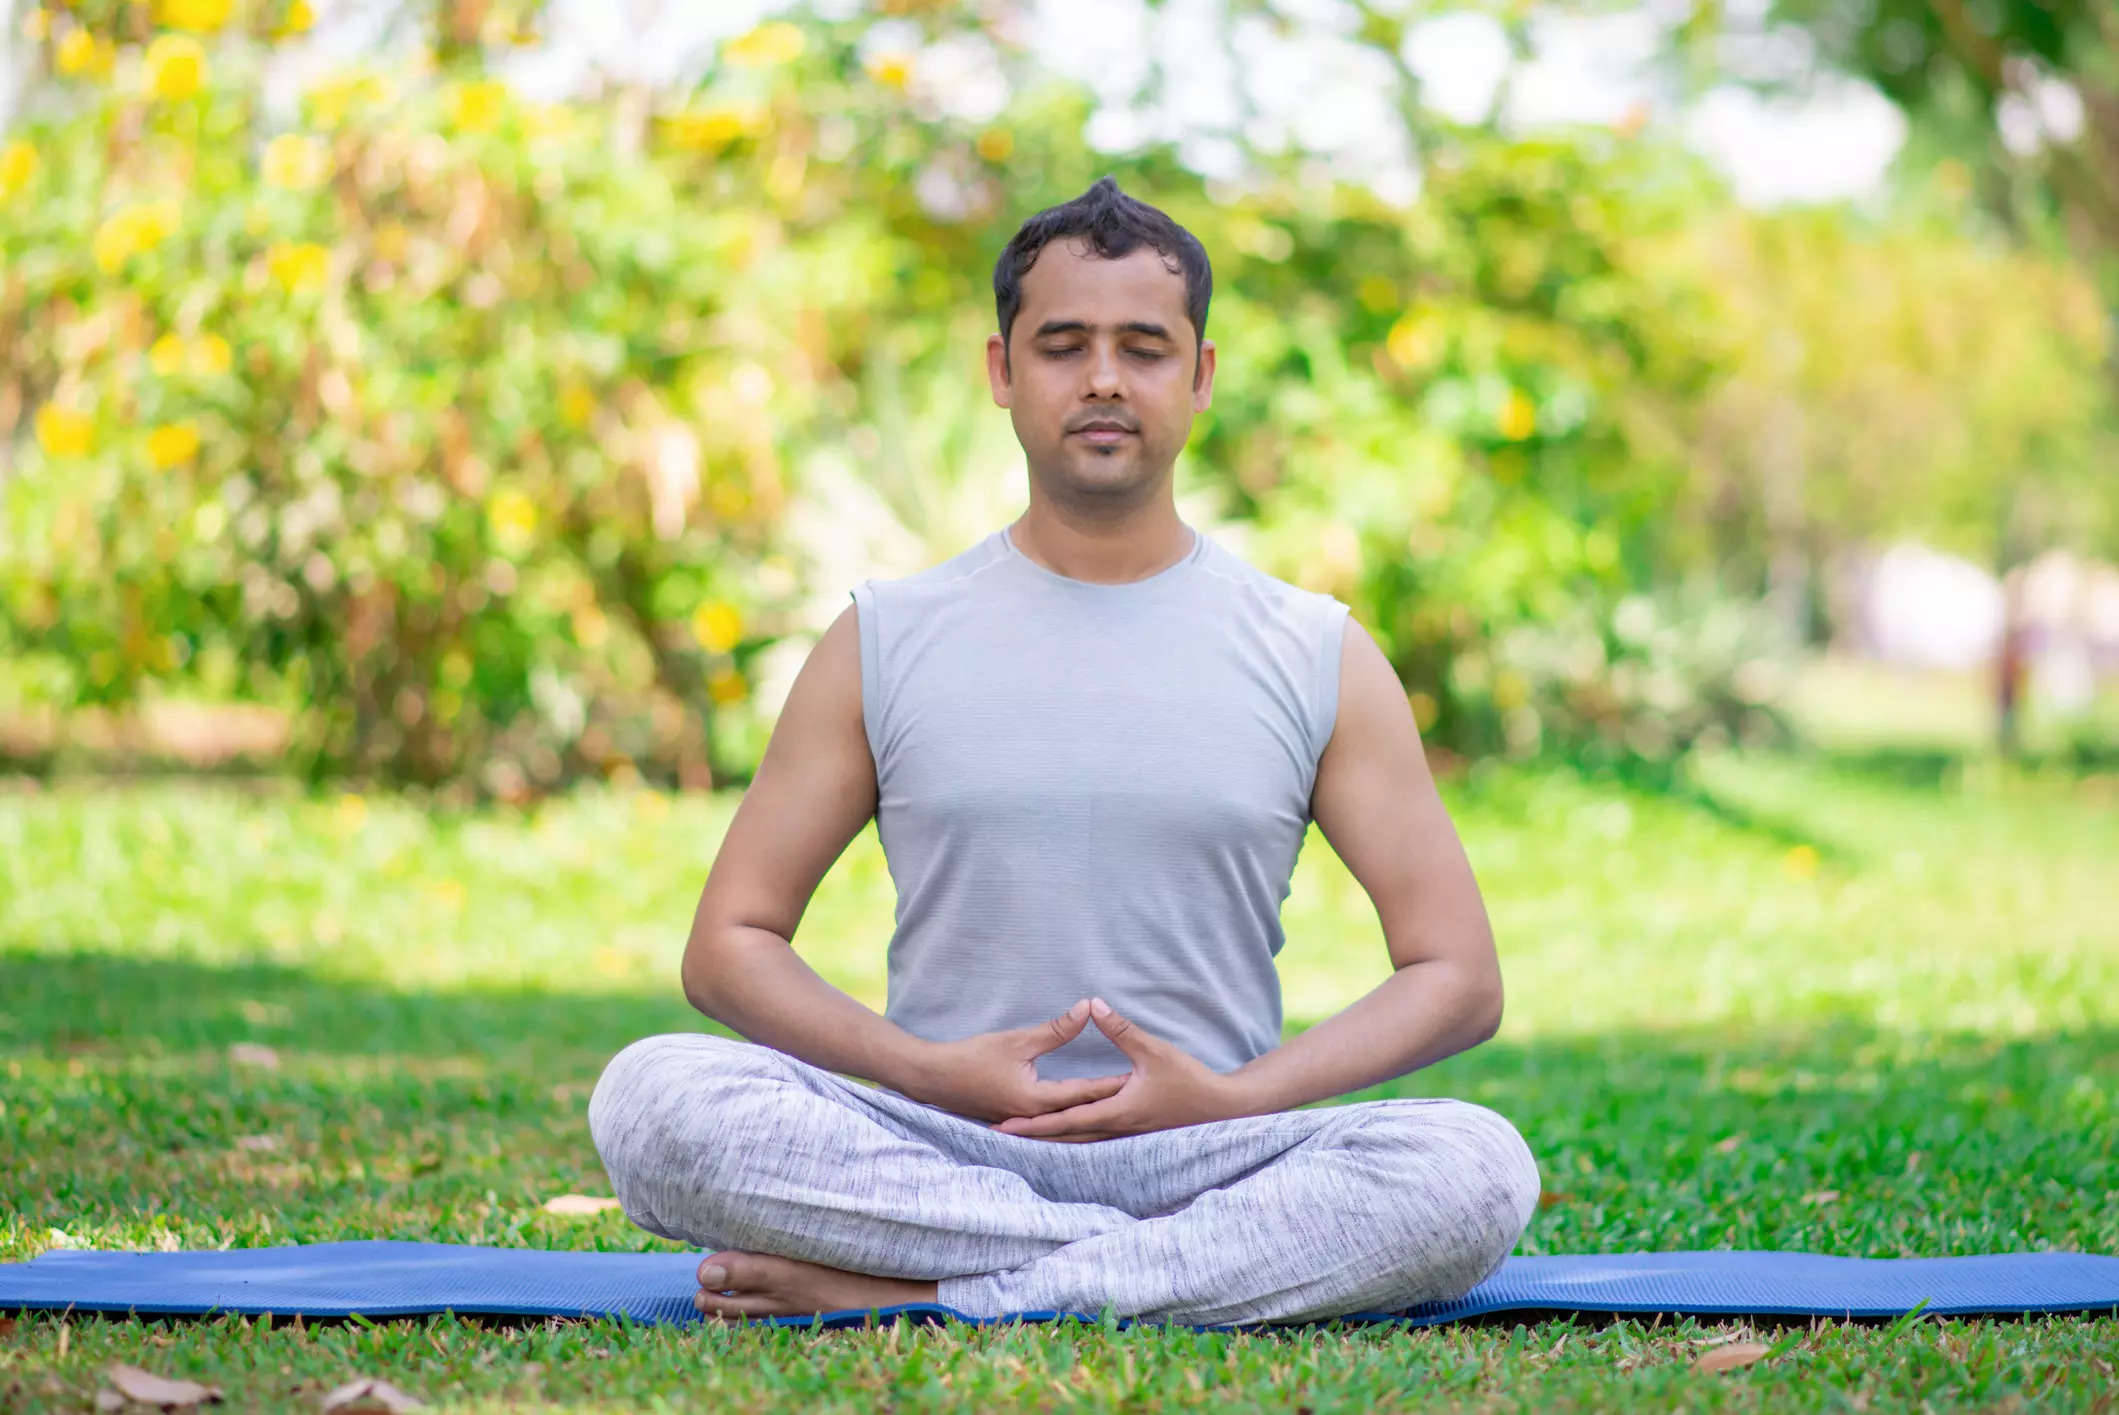 Deep Breathing Might Make You More Stressed - Learn How To Do It Right